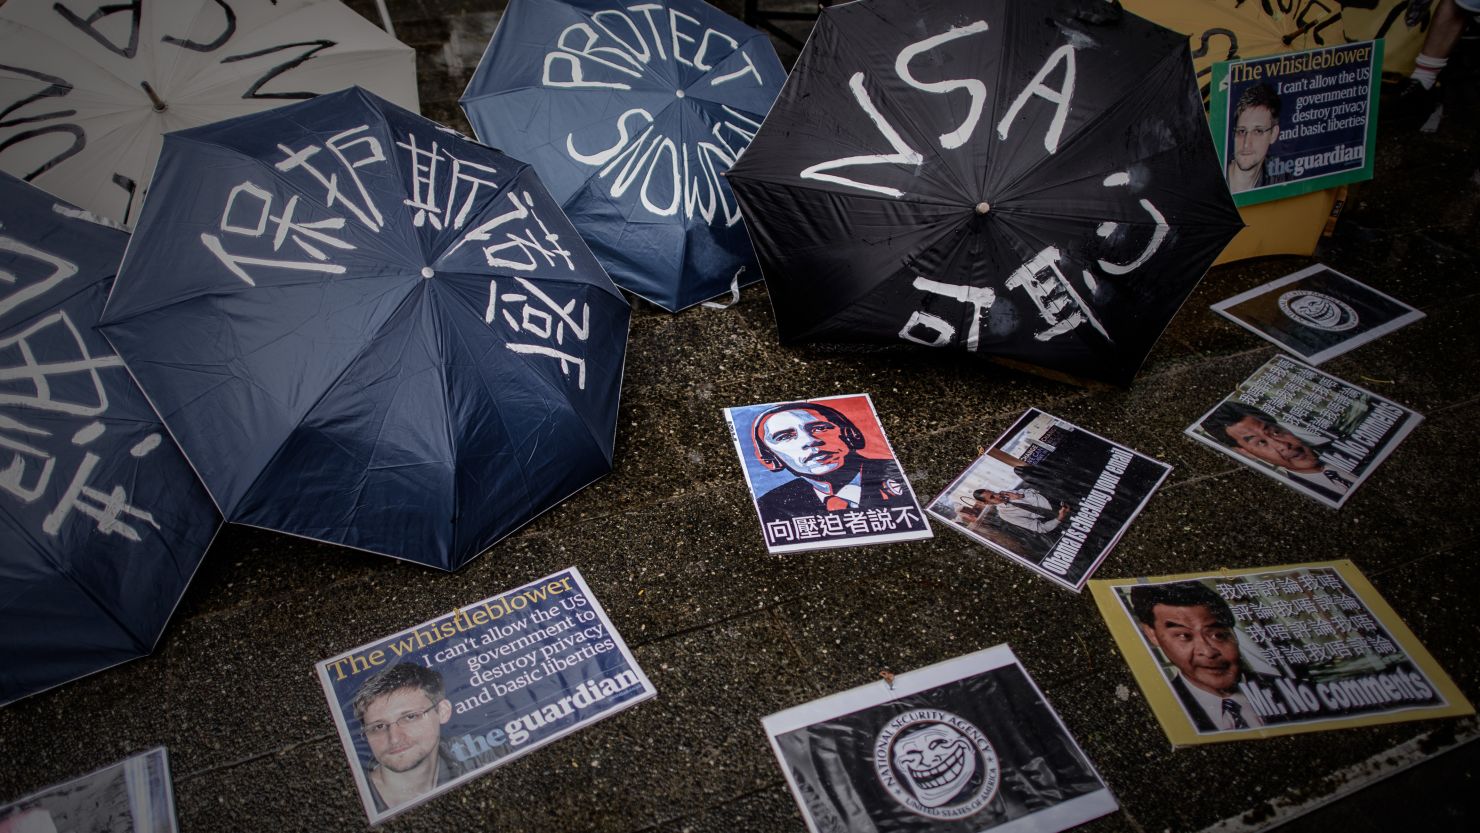 Umbrellas with slogans are lined up before a Hong Kong march to the US consulate in support of NSA leaker Edward Snowden.